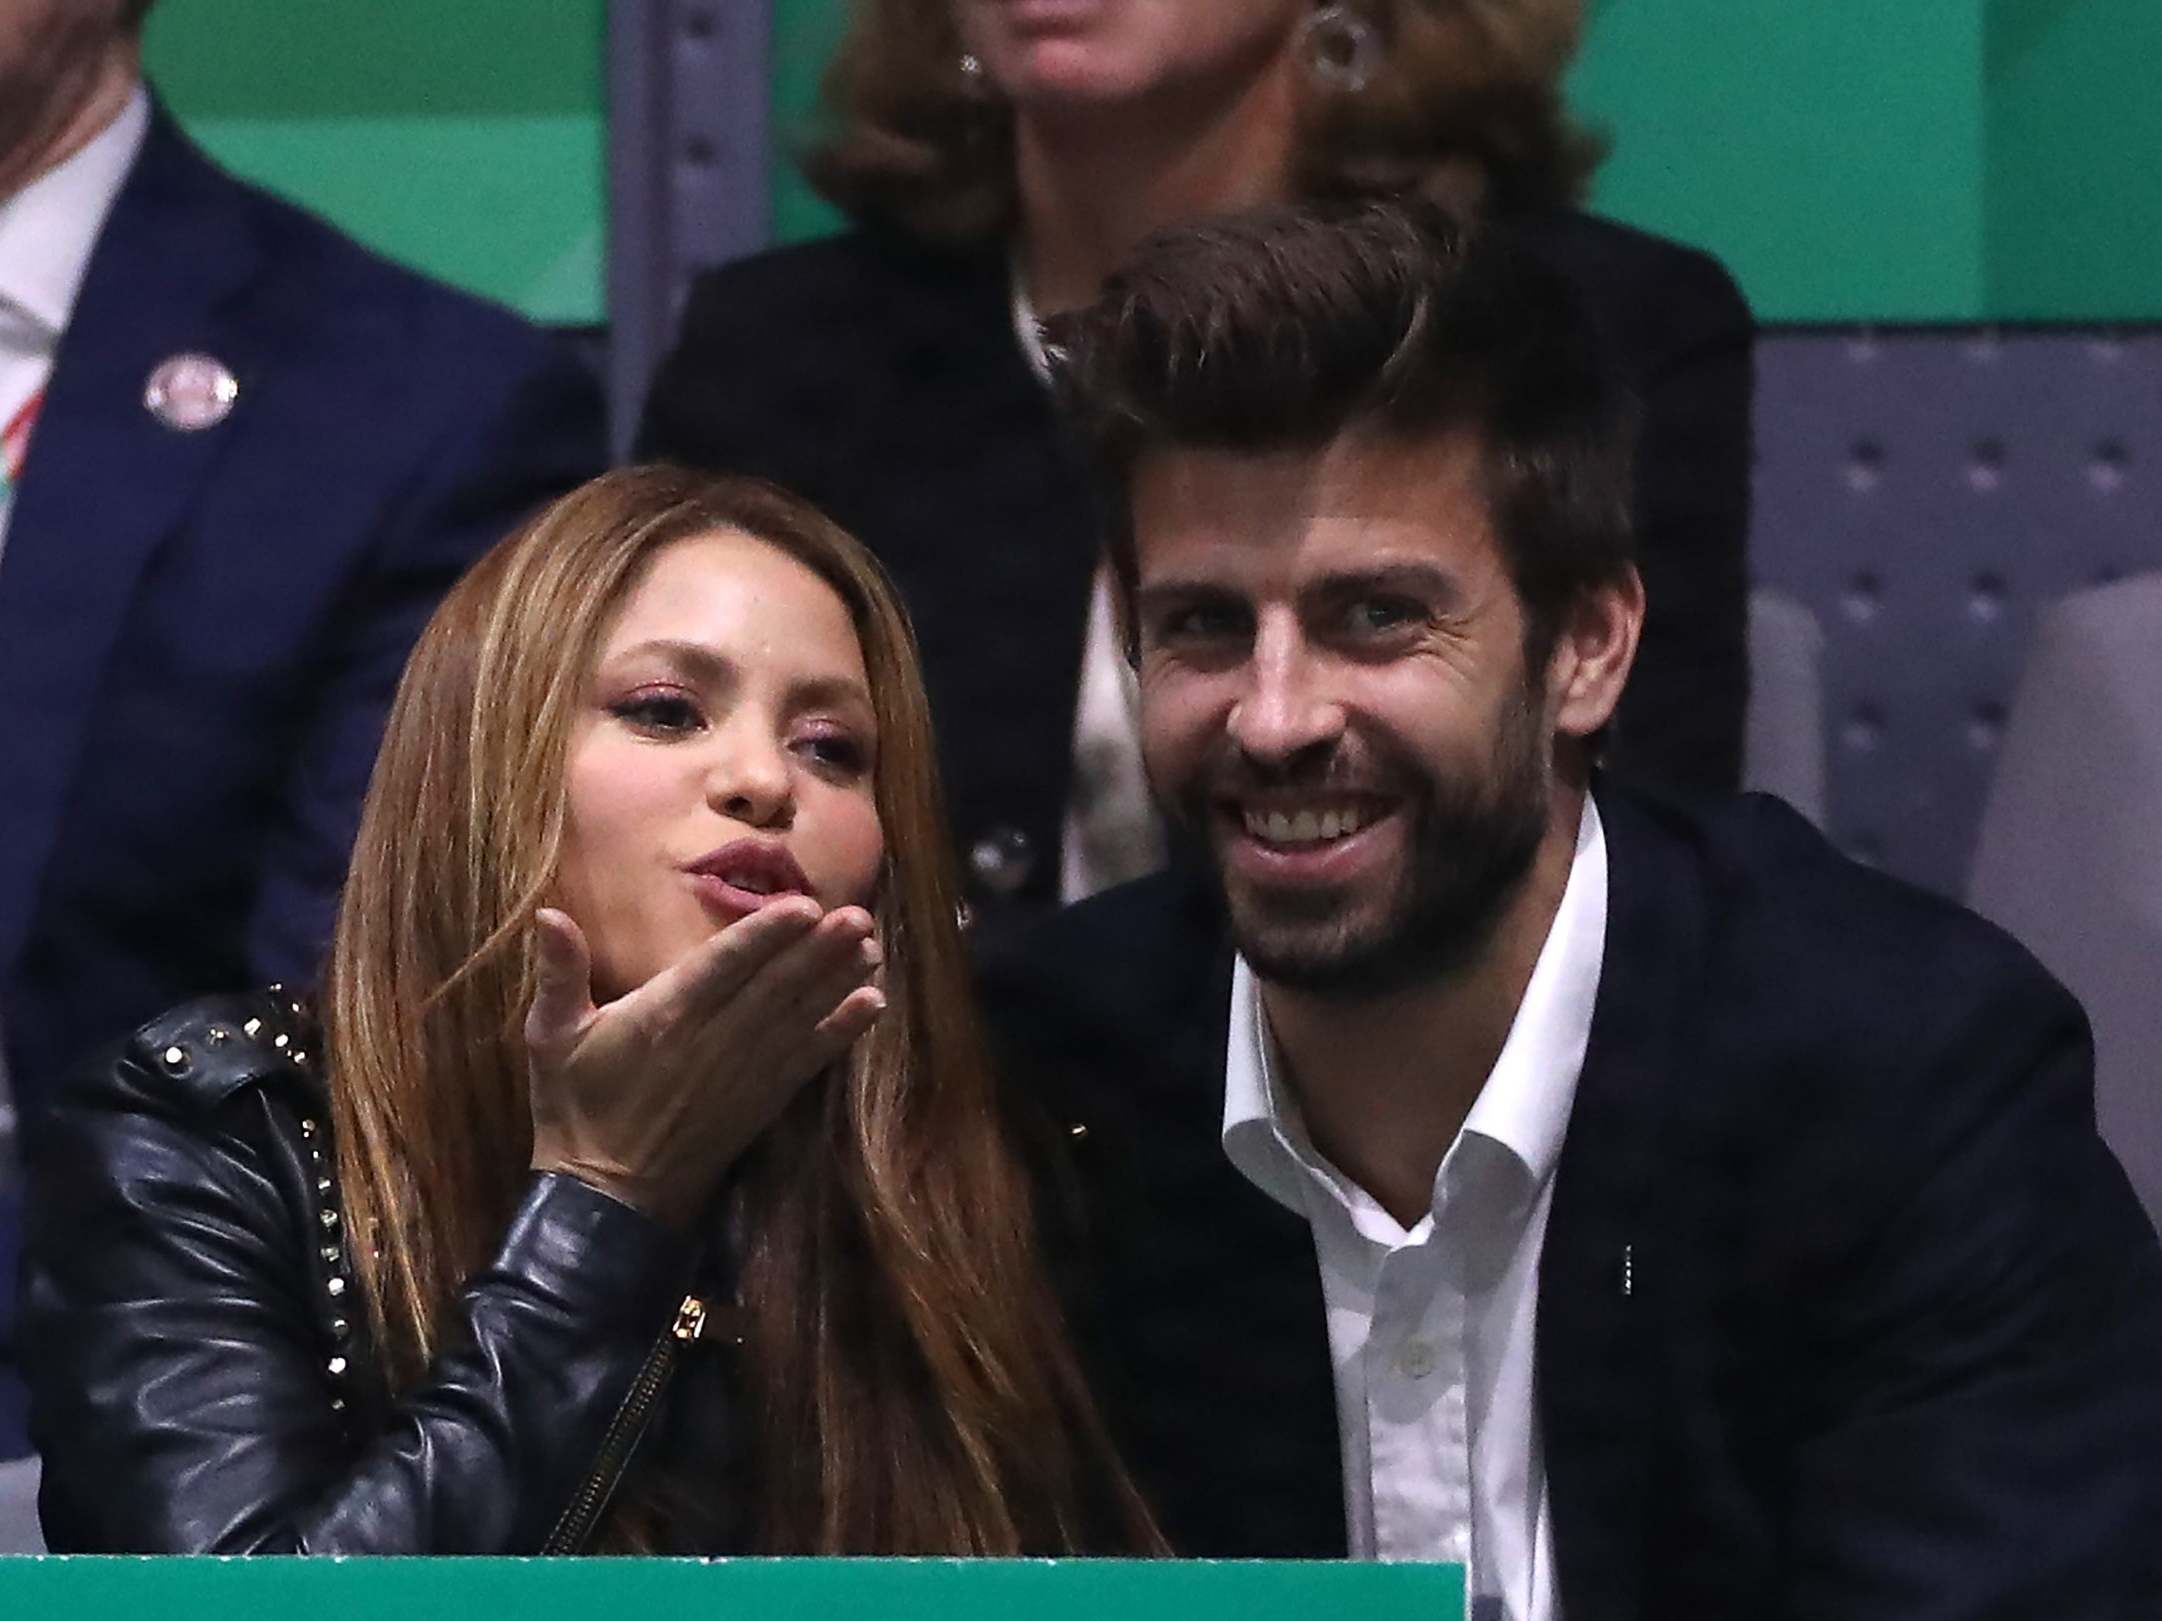 Pique spent a lot of last week watching the Davis Cup that he has helped to revamp